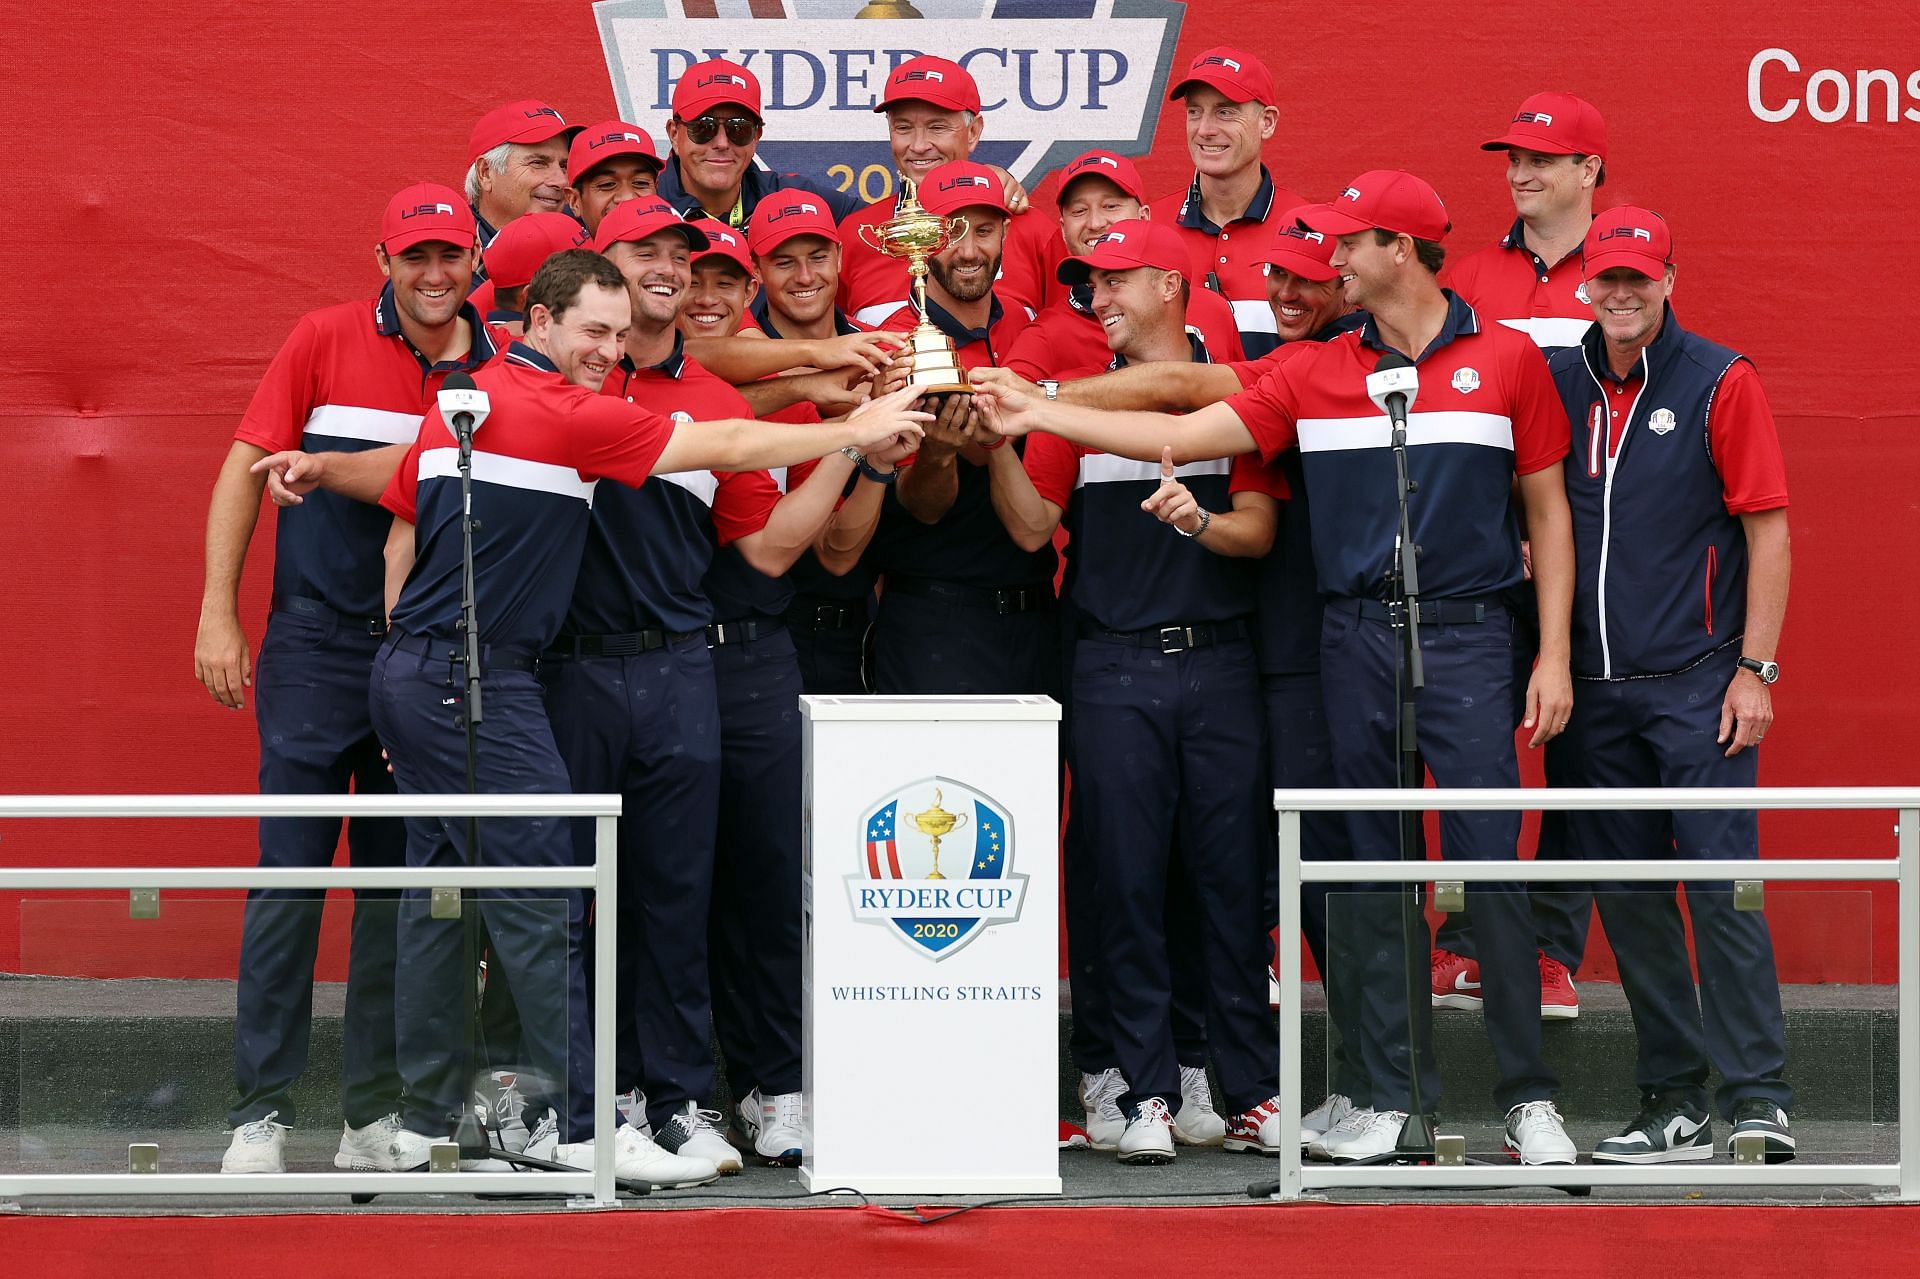 US Ryder Cup team at the 2021 Ryder Cup (via Getty Images)